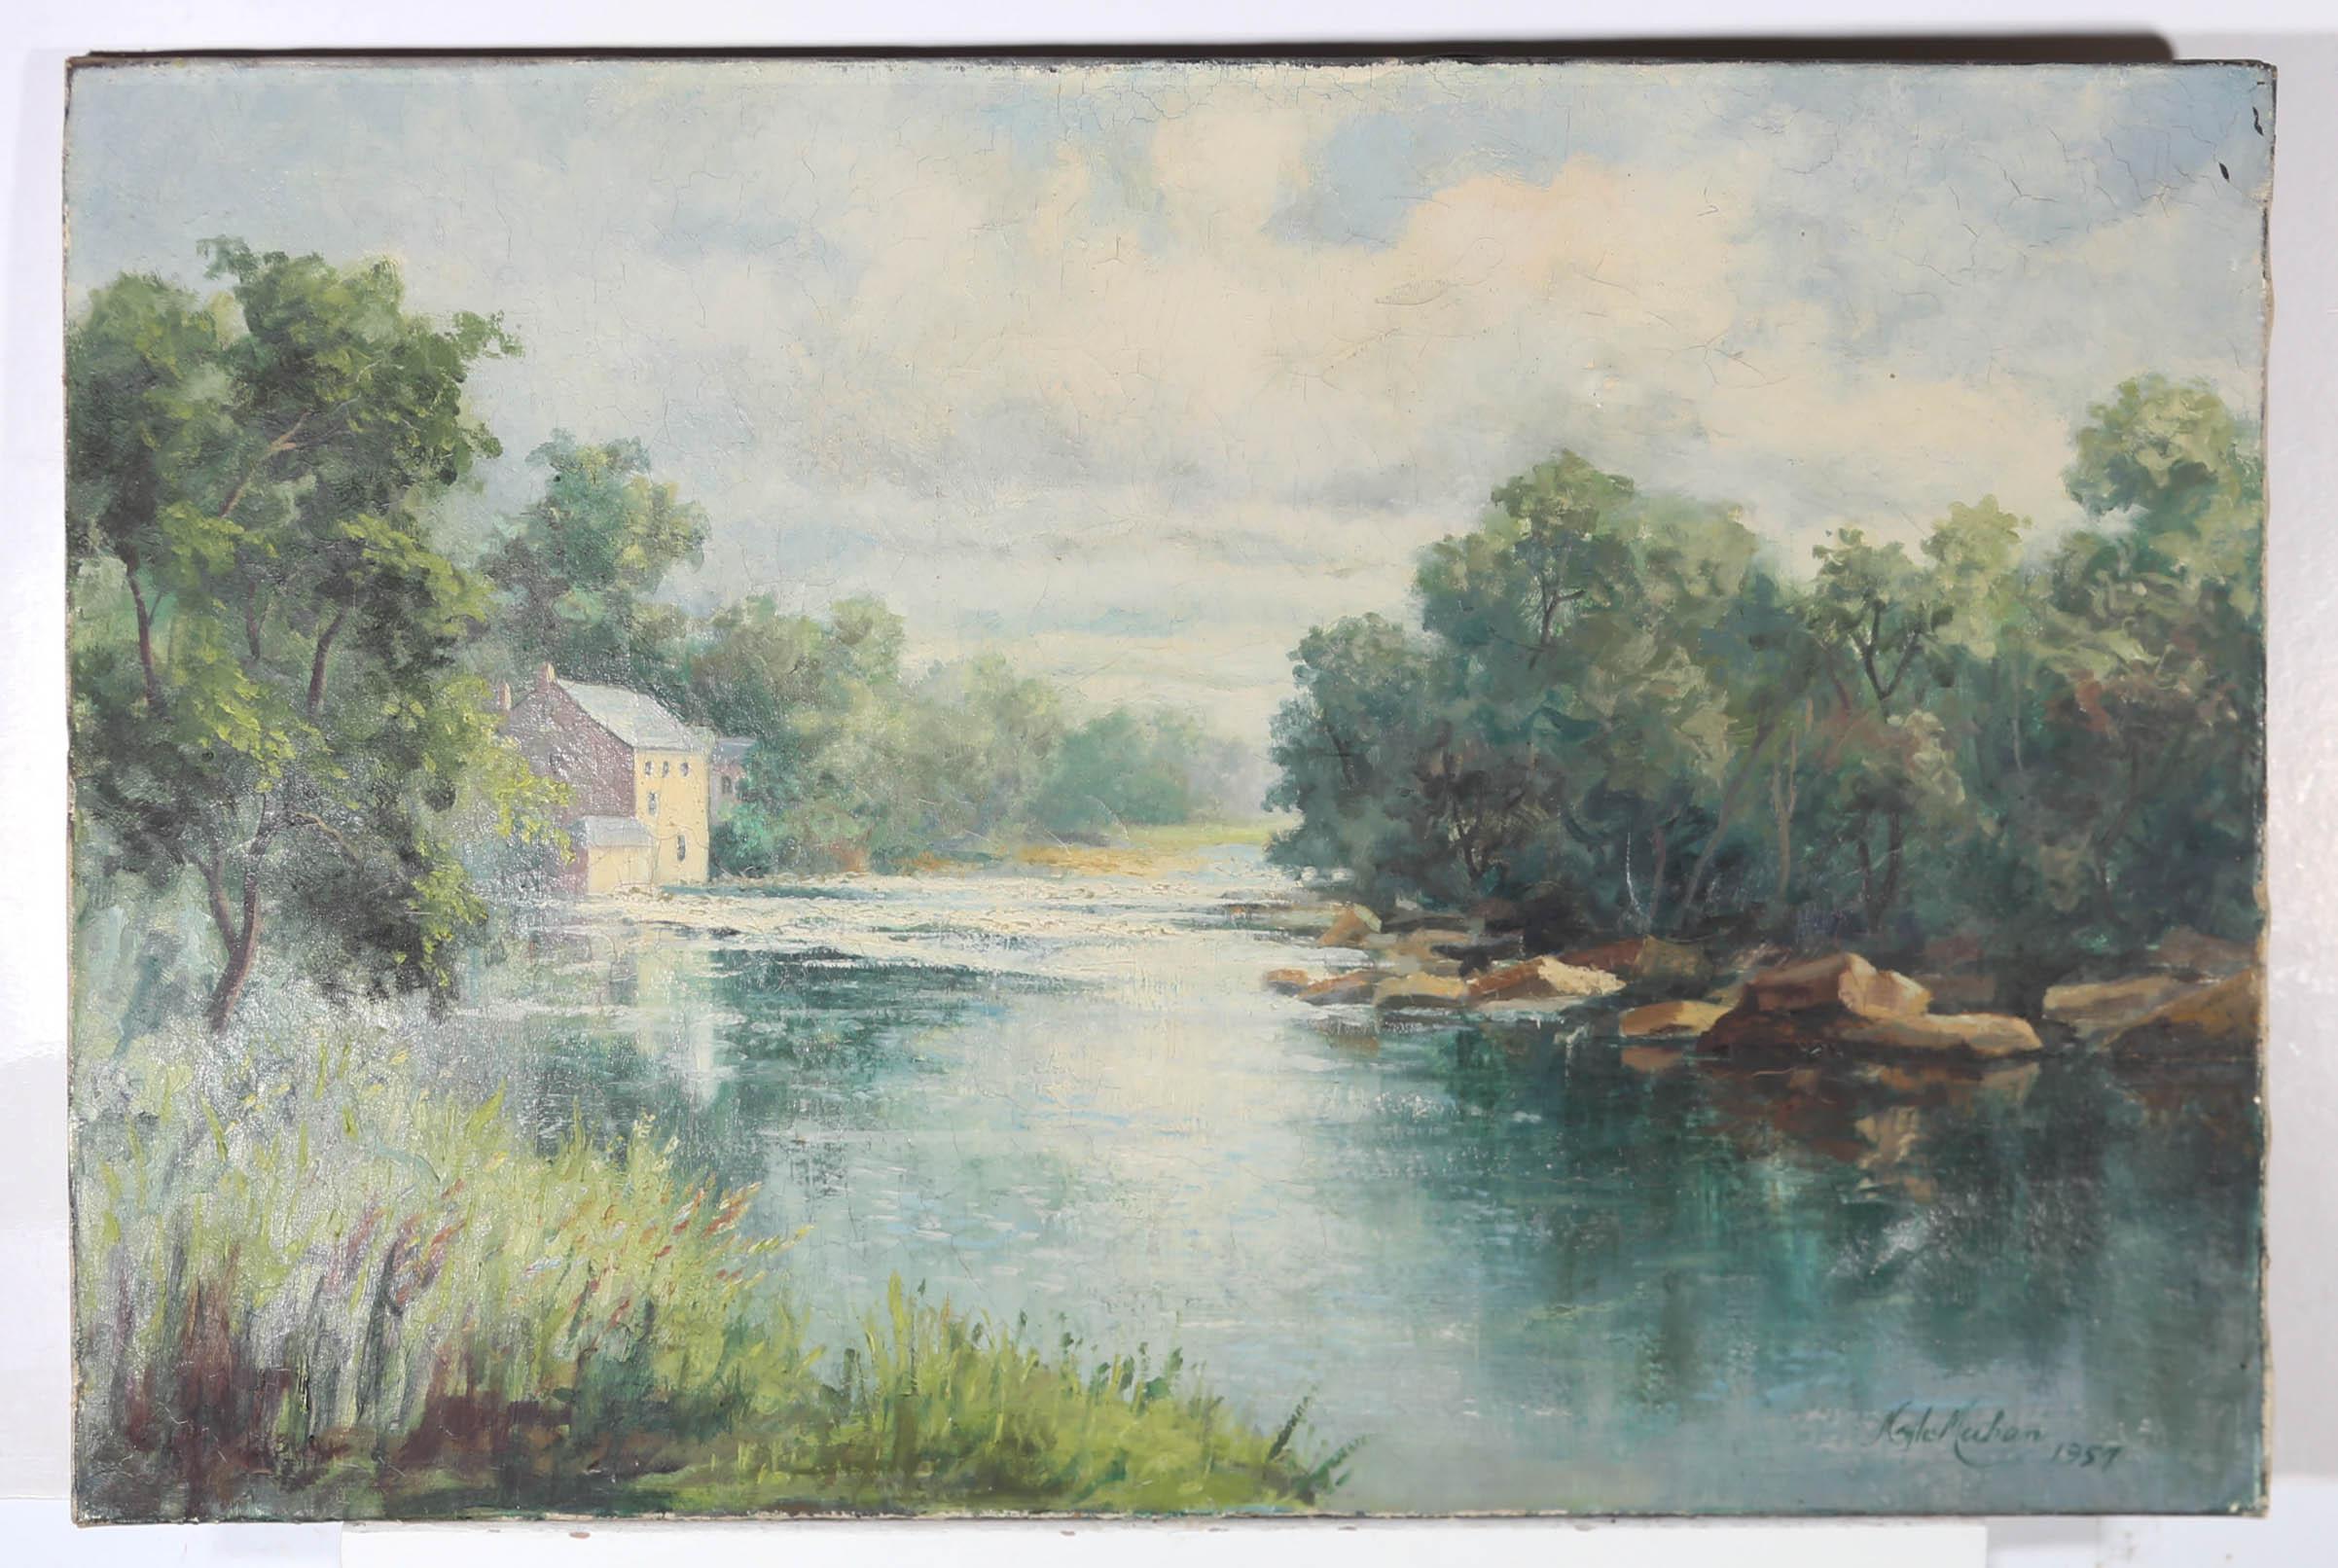 This charming mid-century oil depicts a picturesque view of the River Tee, on the North bank of Barnard Castle. The artist has painted the scene in an impressionistic manner with textured impasto emphasising the river's rippling water bounding over